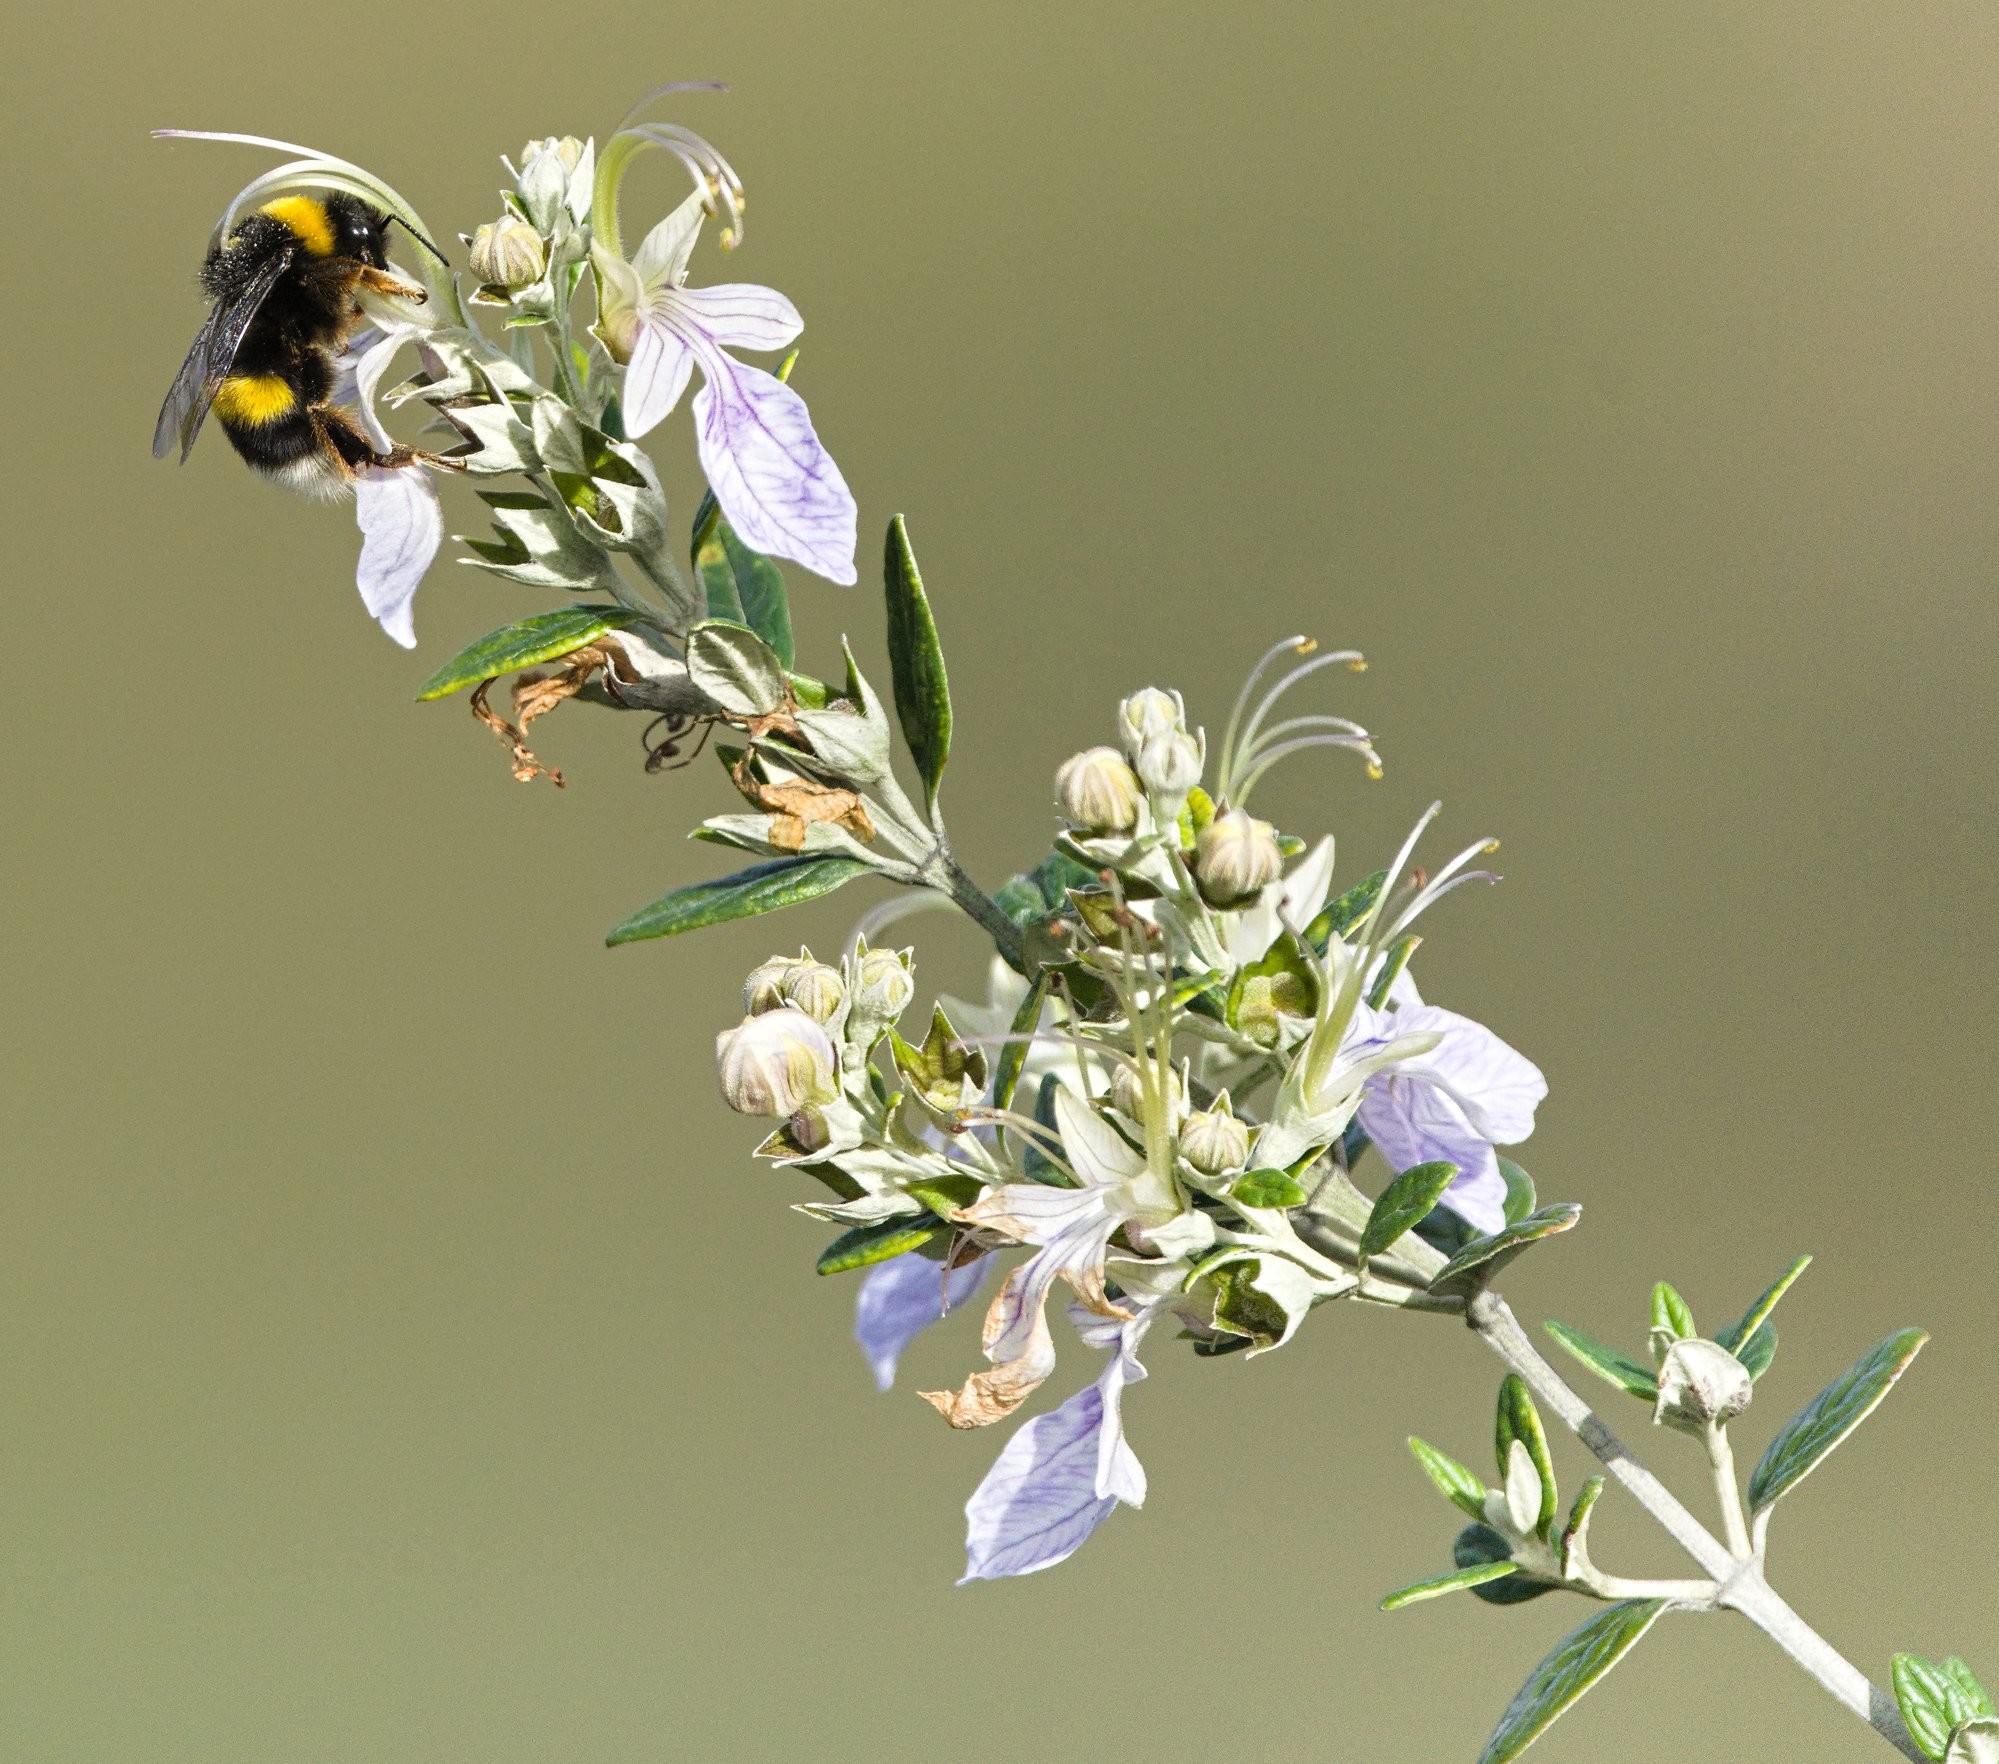 A picture of a yellow and black bumblebee with a white bottom pollinating a flower. The bee is in the top right of the picture. The plant I believe to be Teucrium fruticans or similar!